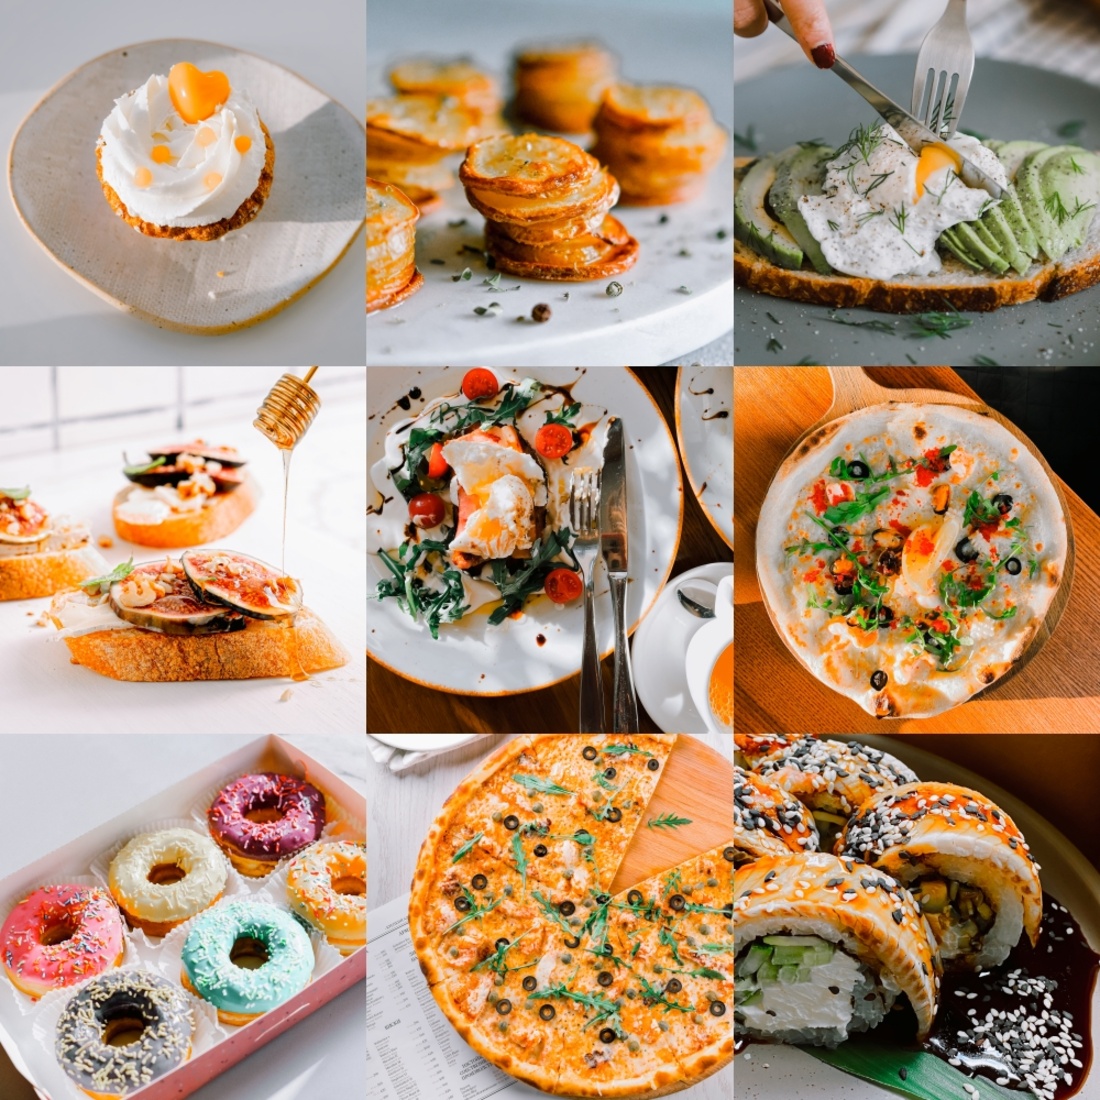 10+ Yummy Food Lightroom Presets cover image.